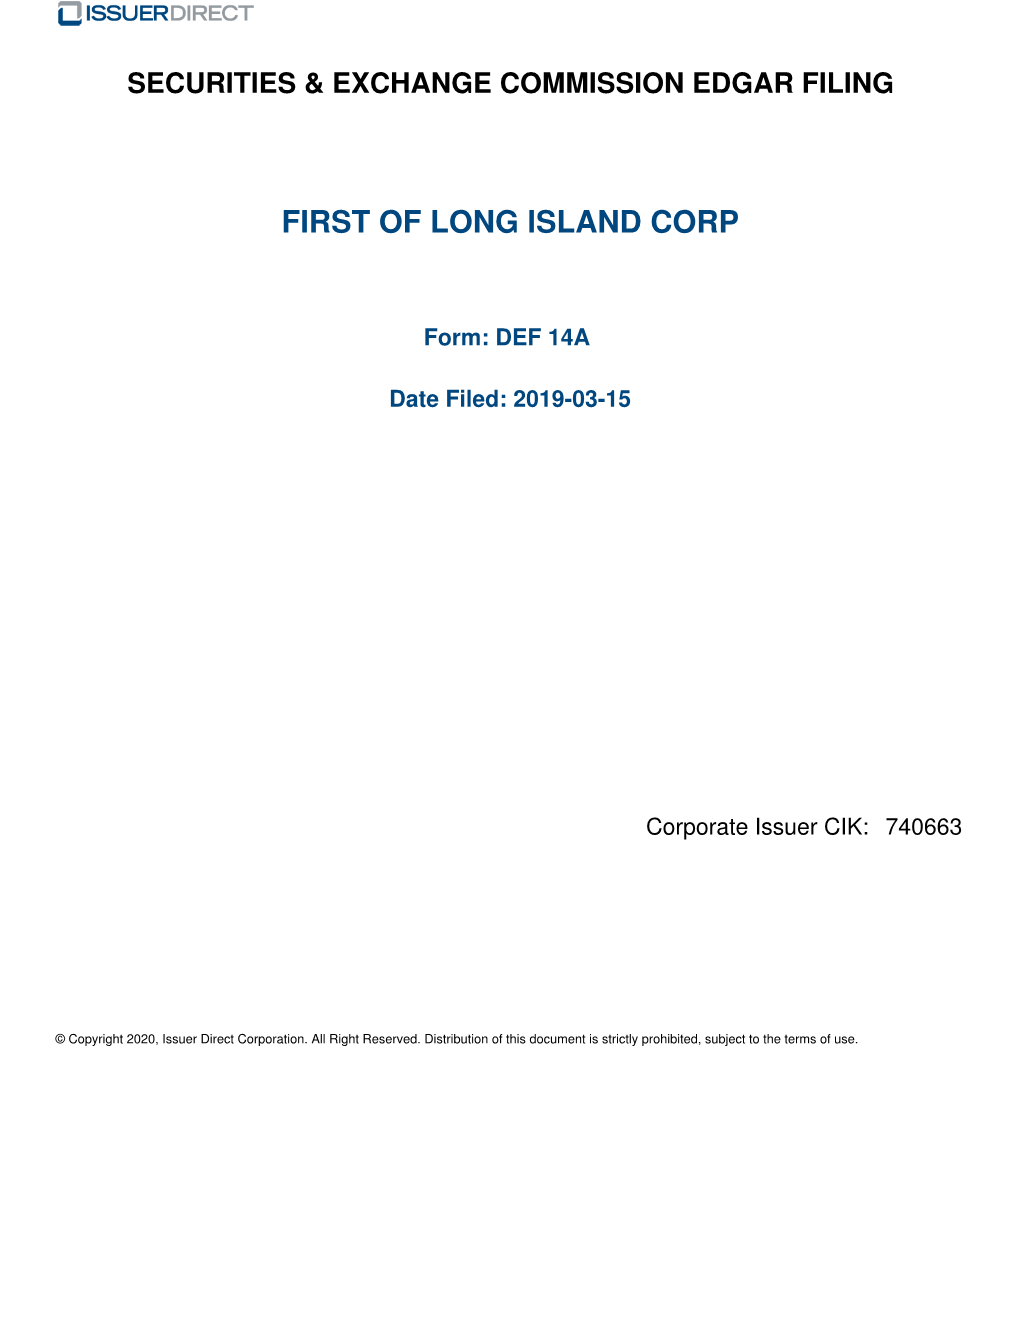 First of Long Island Corp